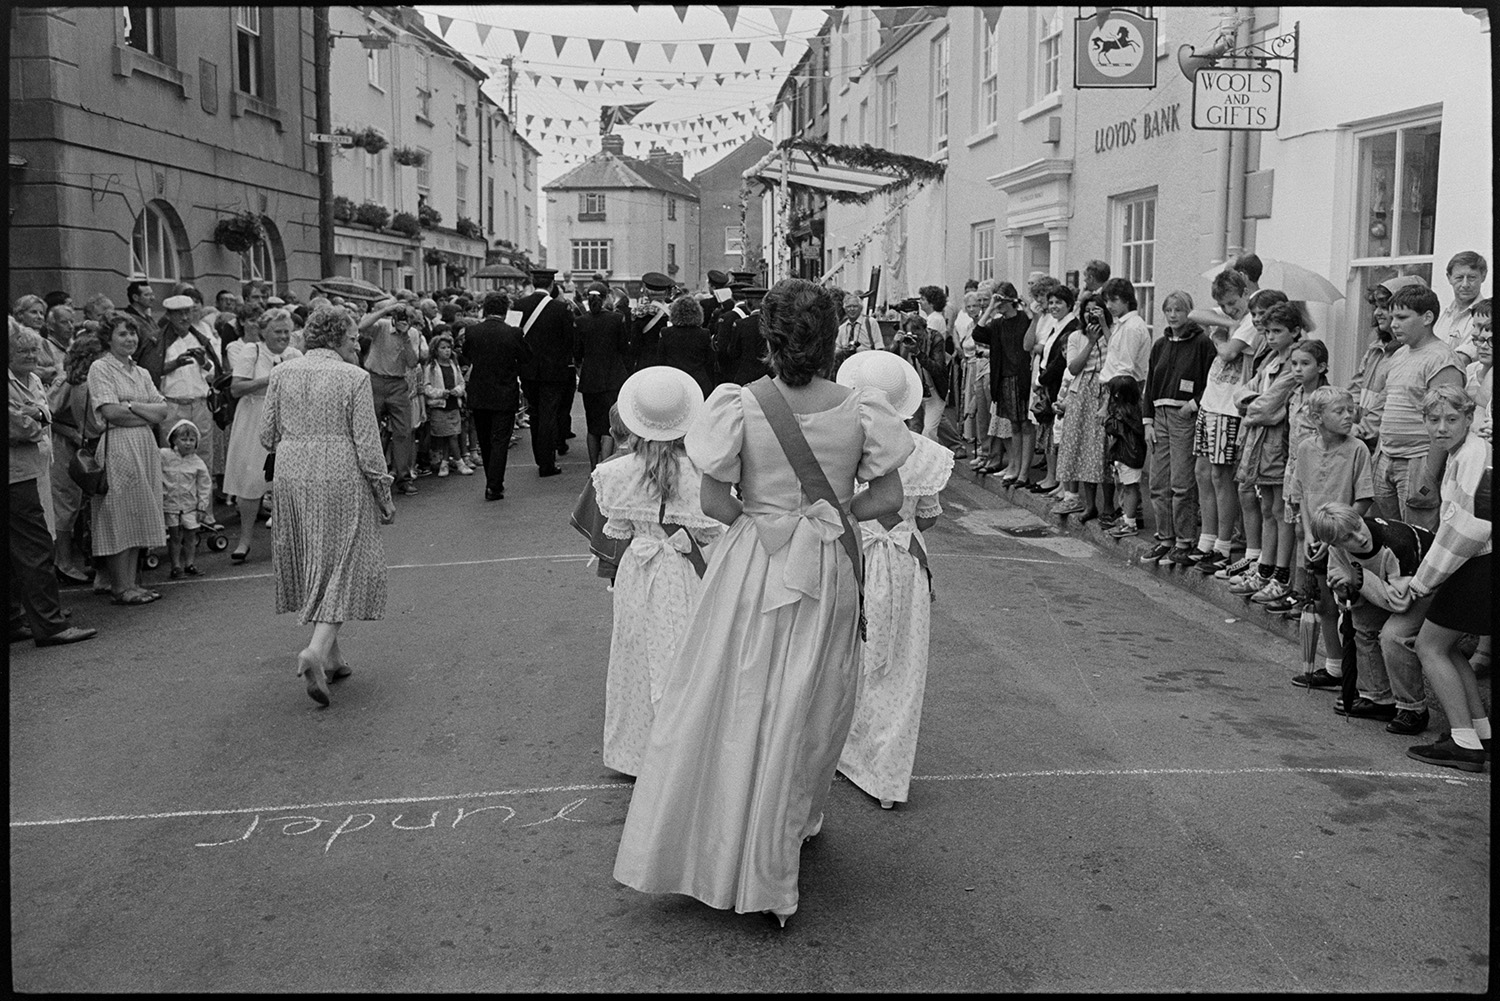 Chulmleigh Fair, Queen and attendants leaving church and processing through village.
[The Chulmleigh Fair Queen and attendants processing along Fore Street, Chulmleigh behind a marching band at Chulmleigh Fair. People are watching from both sides of the street. The street is decorated with bunting and Lloyds Bank can be seen and a sign for 